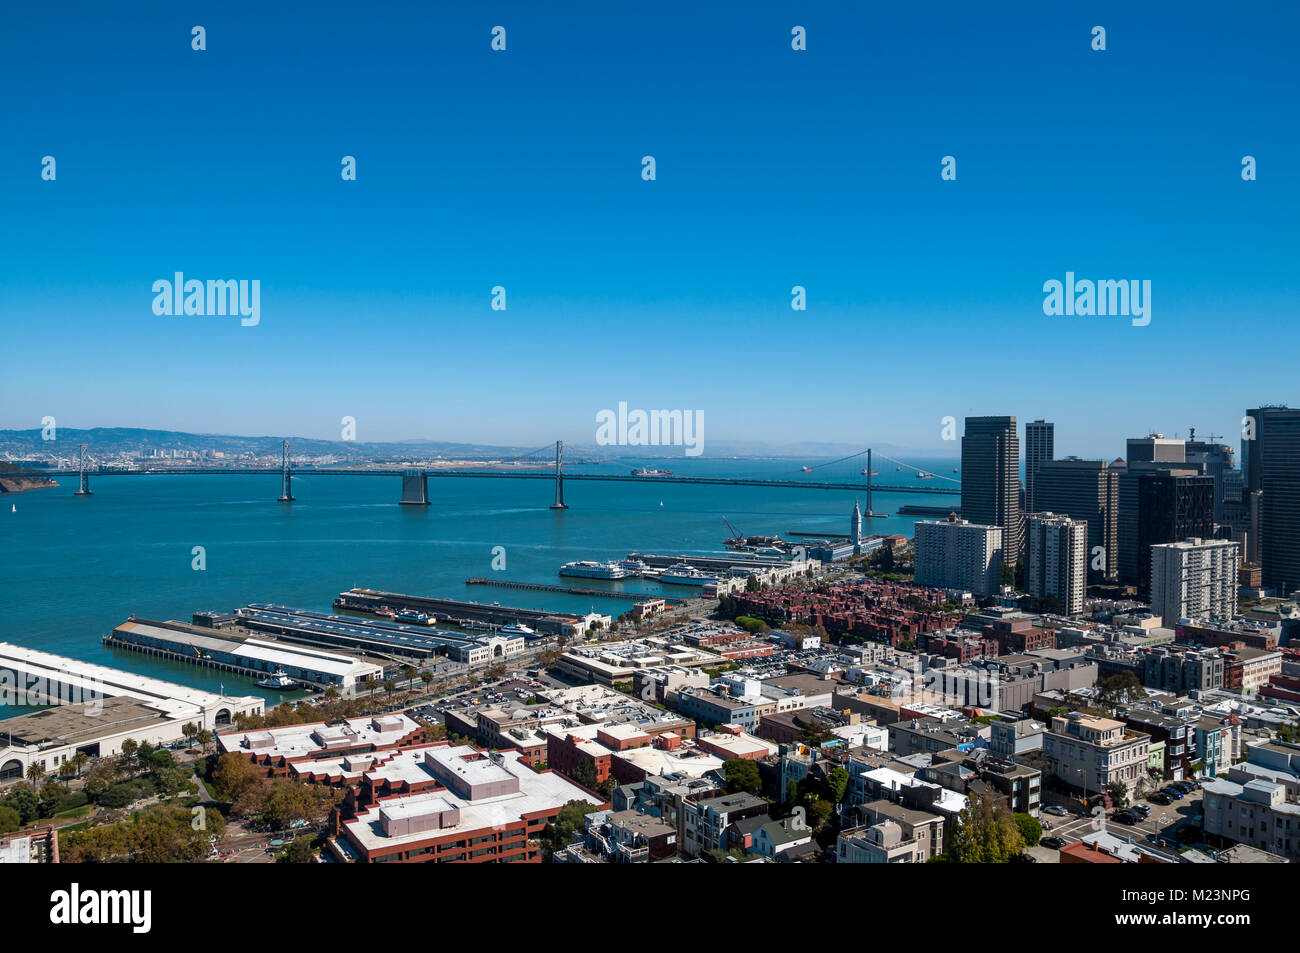 SAN FRANCISCO, CALIFORNIA - SEPTEMBER 9, 2015 - View of the Embarcadero area and Oakland Bay Bridge from Coit Tower Stock Photo